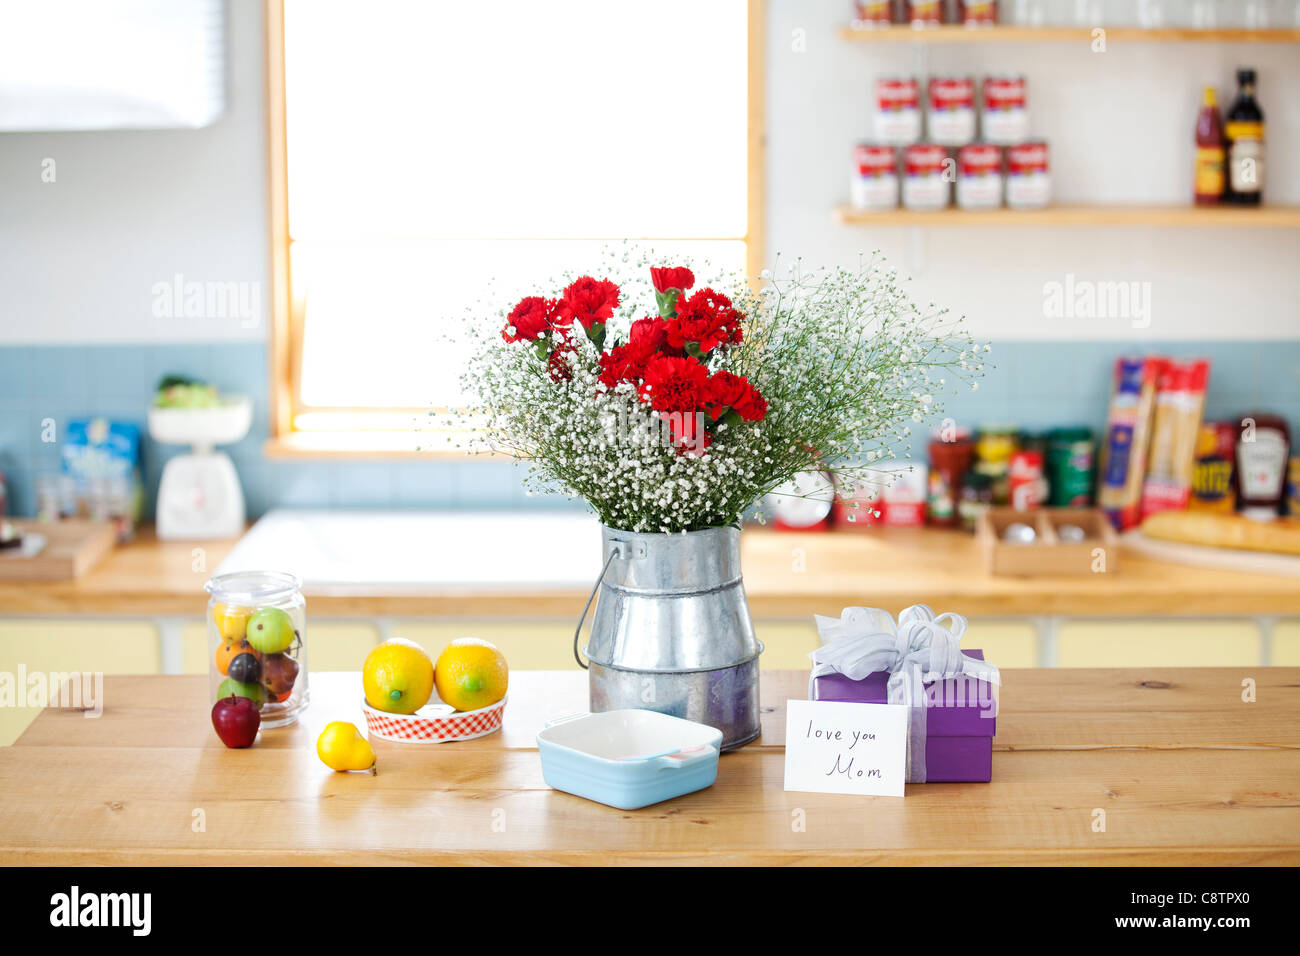 Wrapped Gift Box And Bunch Of Flower On The Kitchen Counter Stock Photo